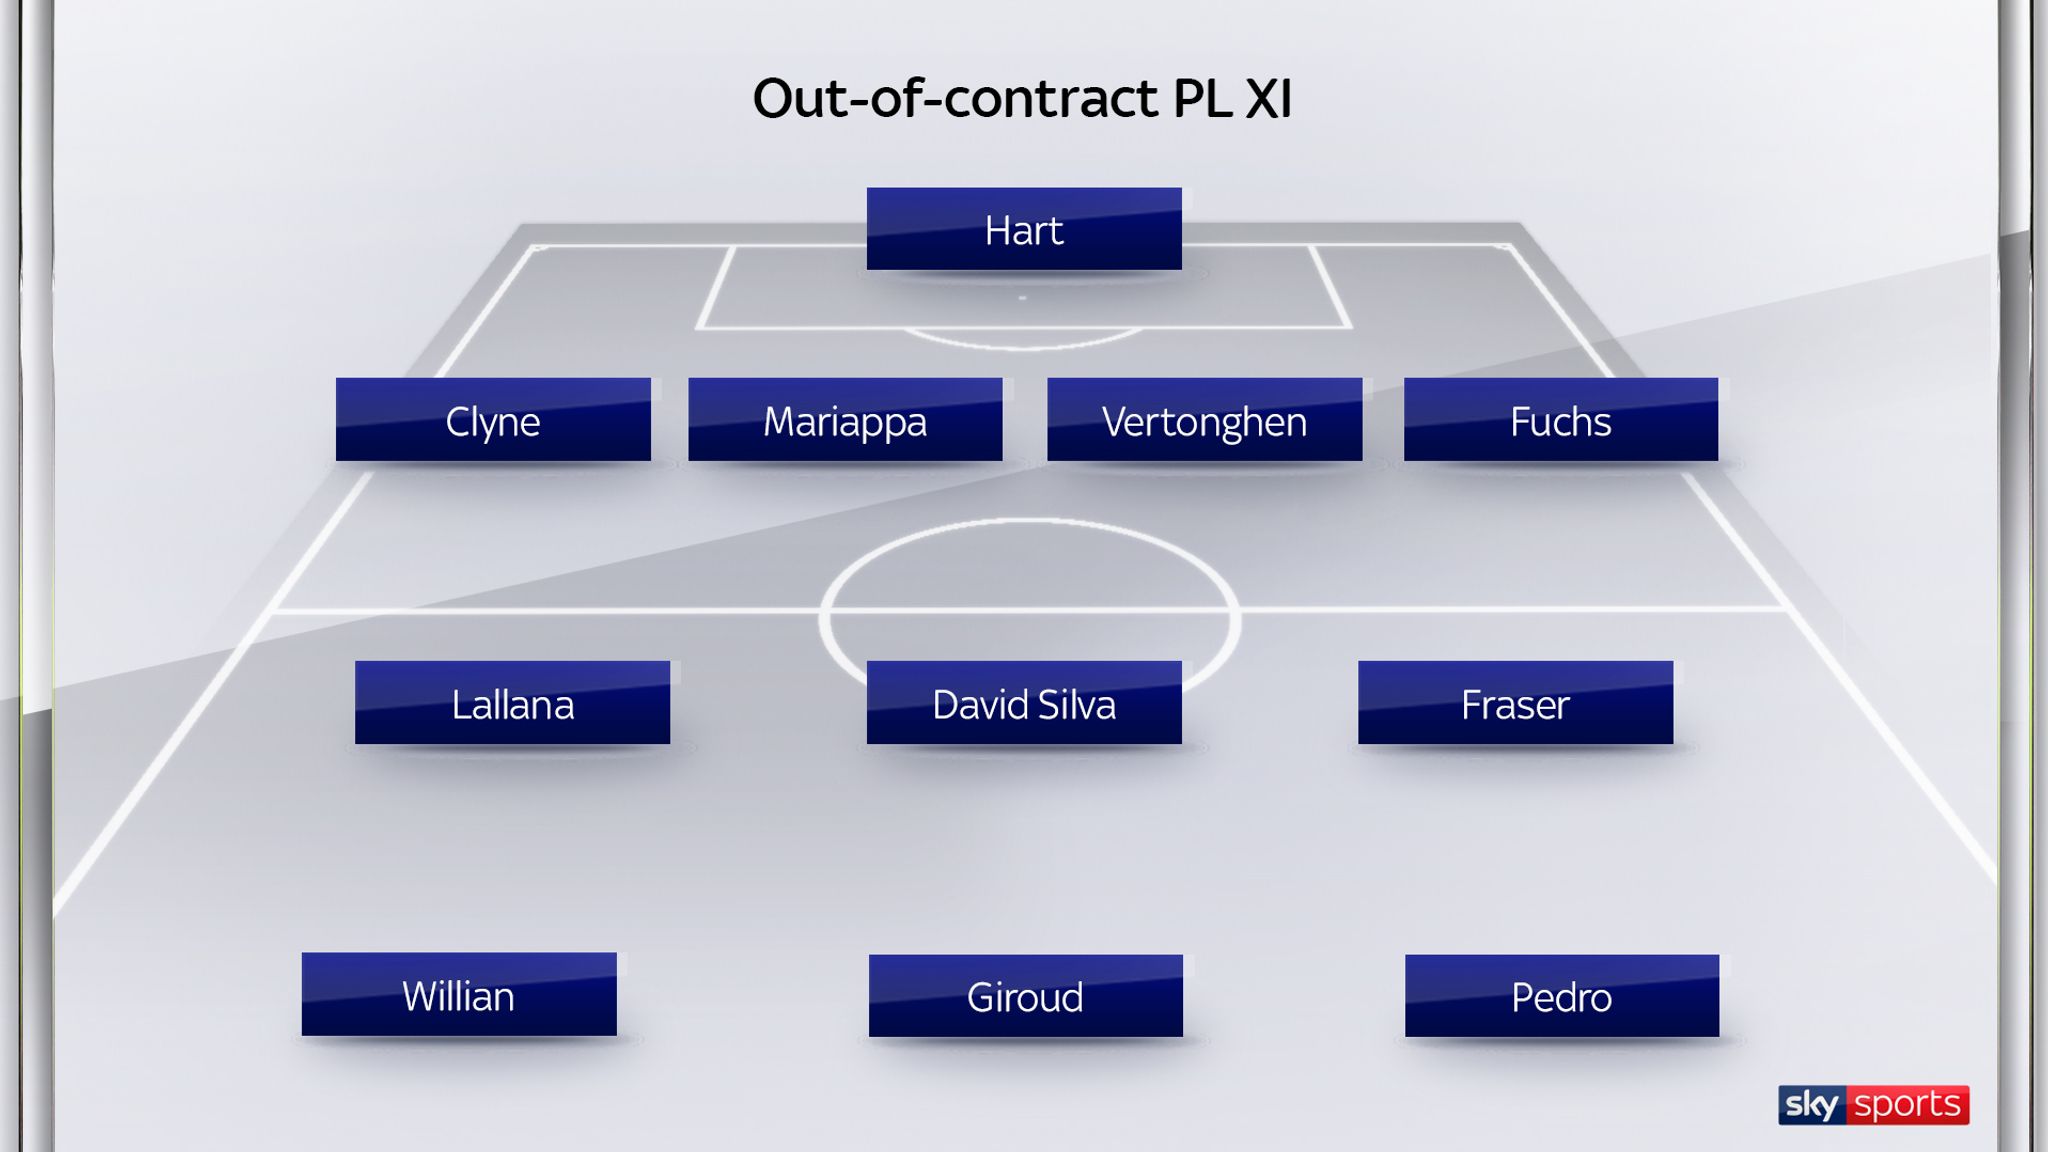 Premier League players out of contract in summer transfer window